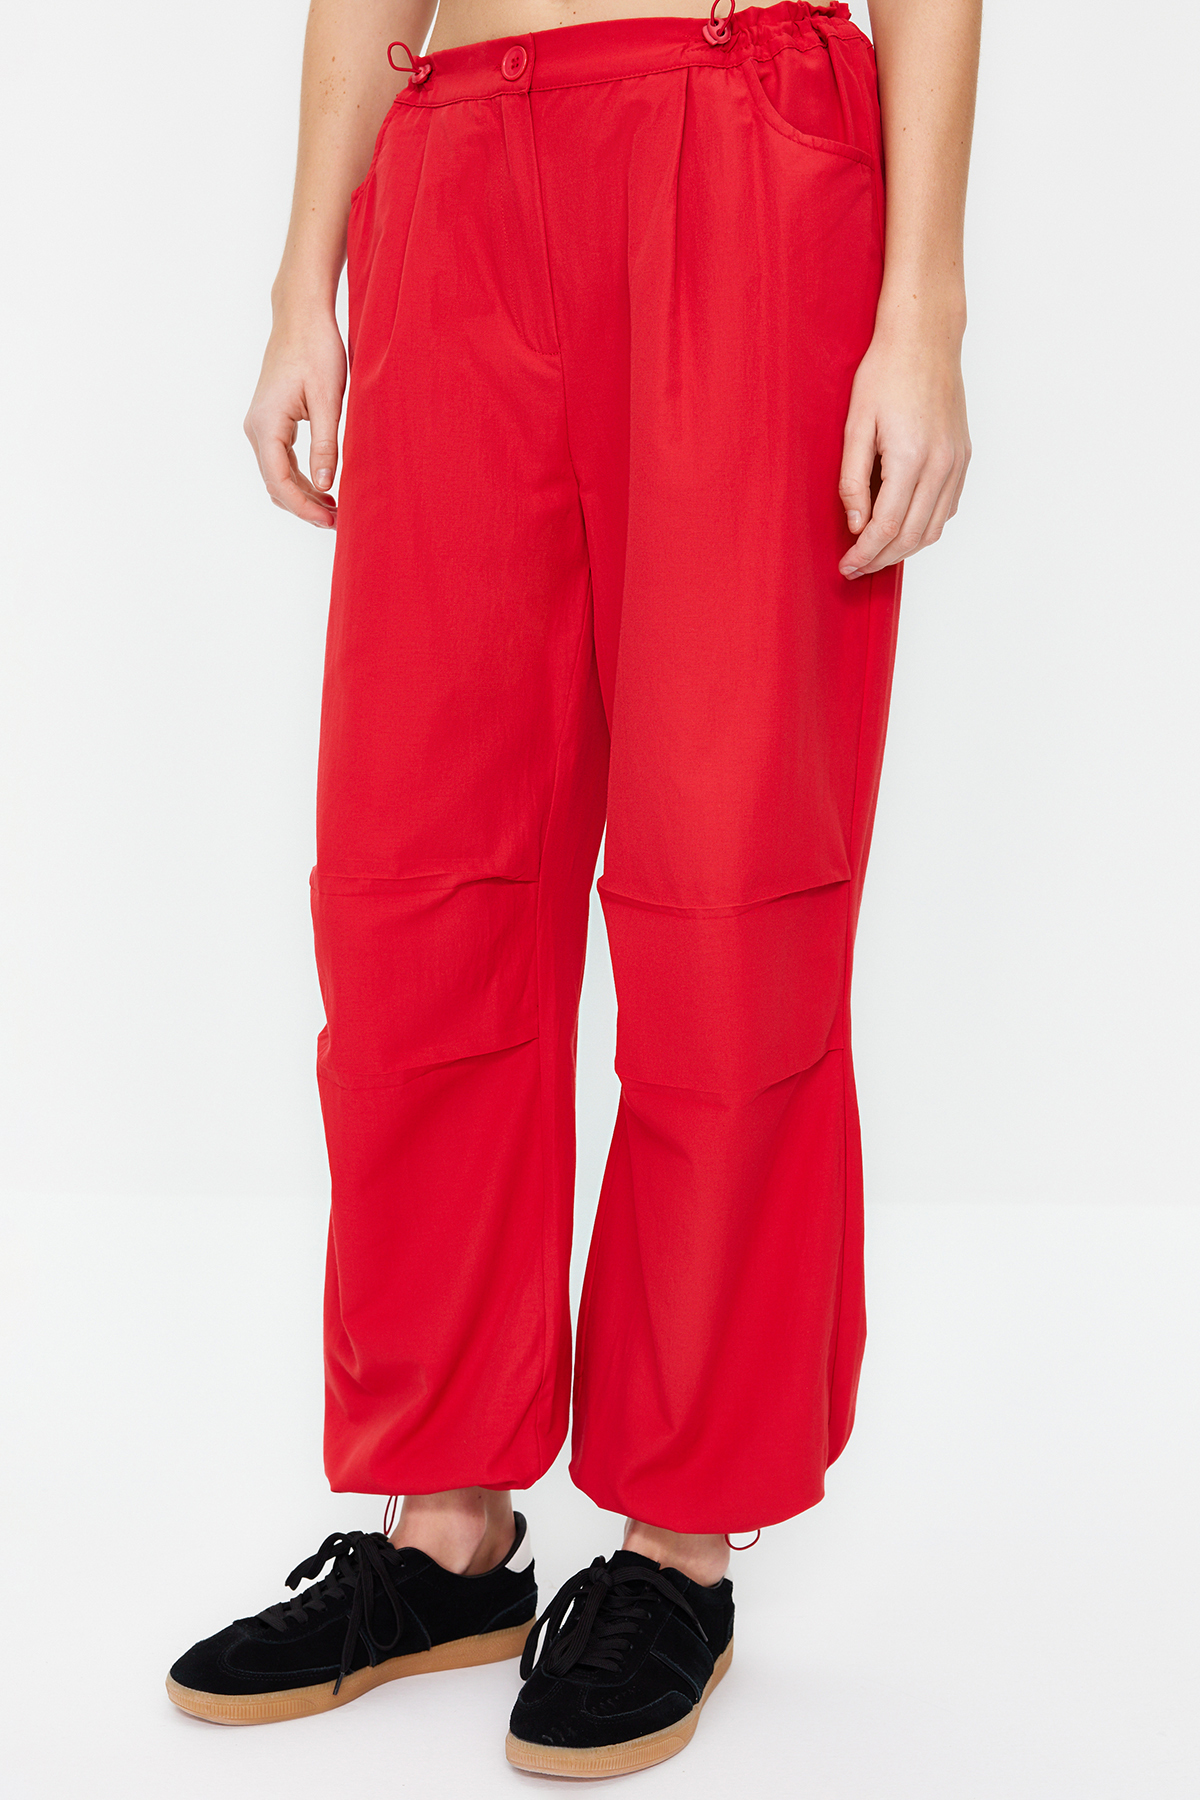 Trendyol Red Jogger Normal Waist Elastic Woven Trousers